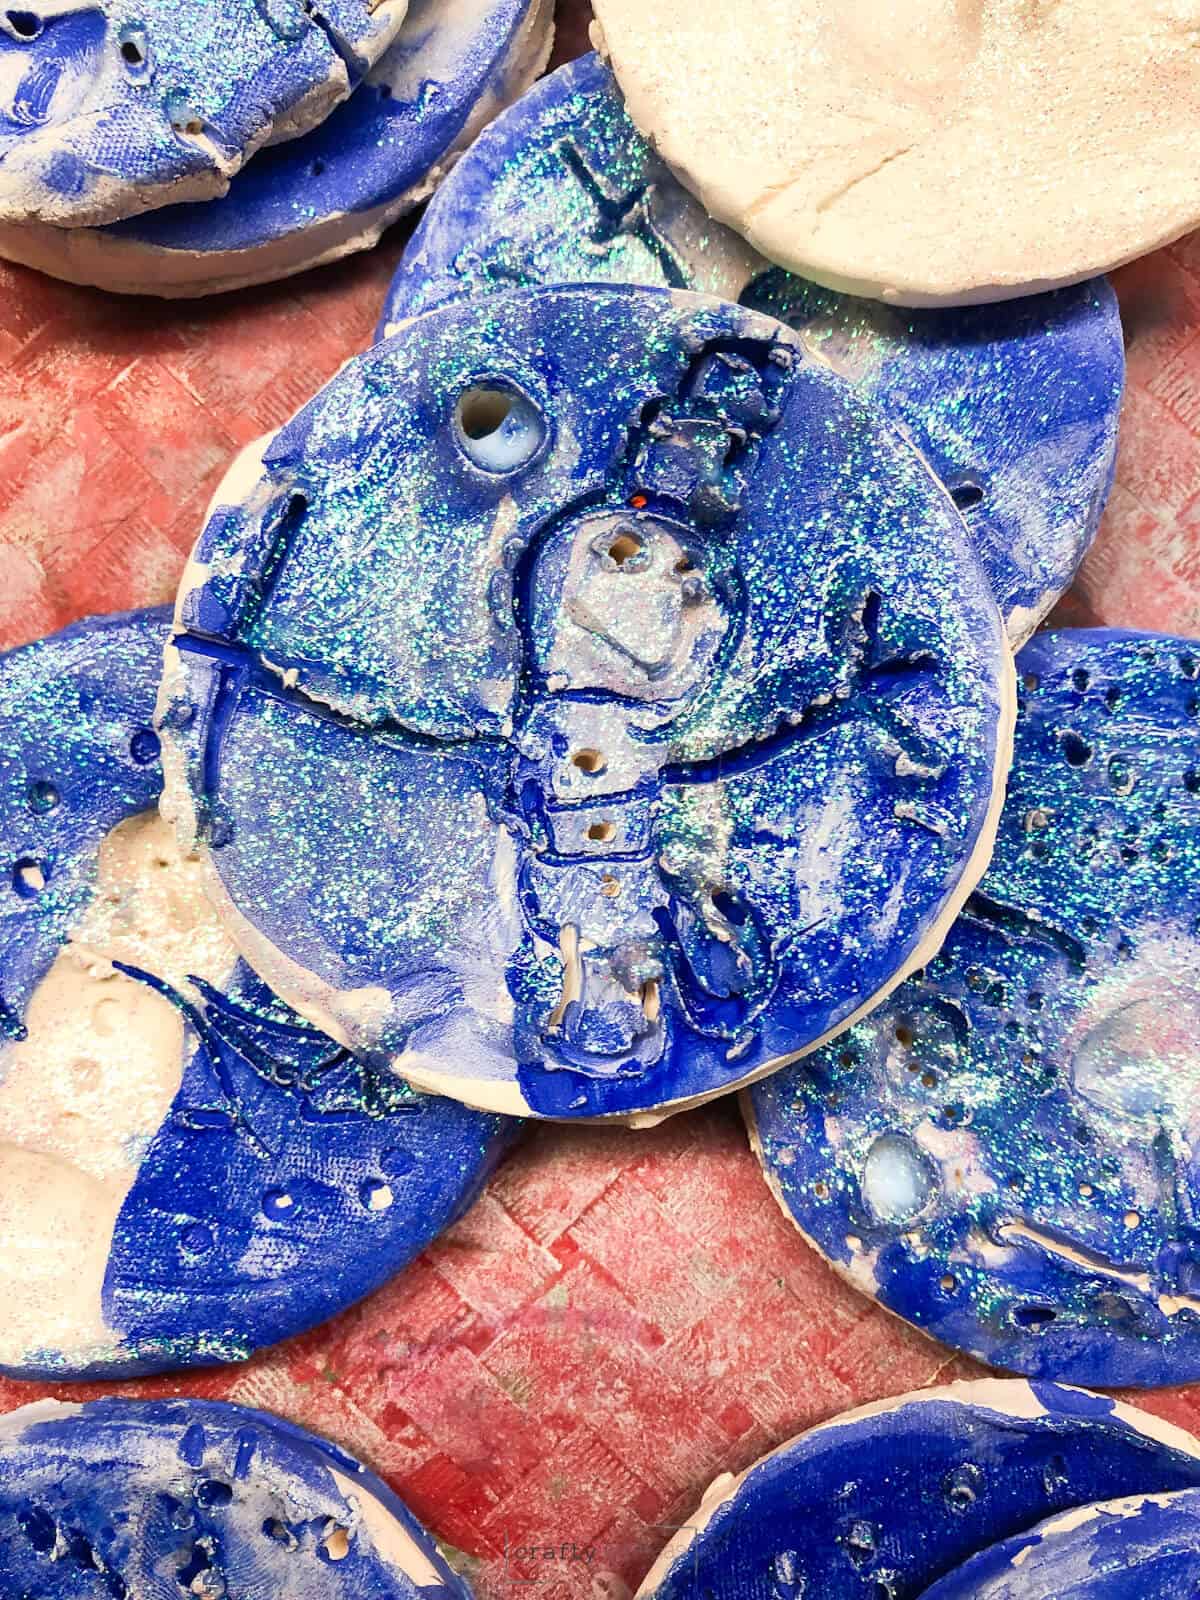 blue glitter snowman clay project for kindergartners.